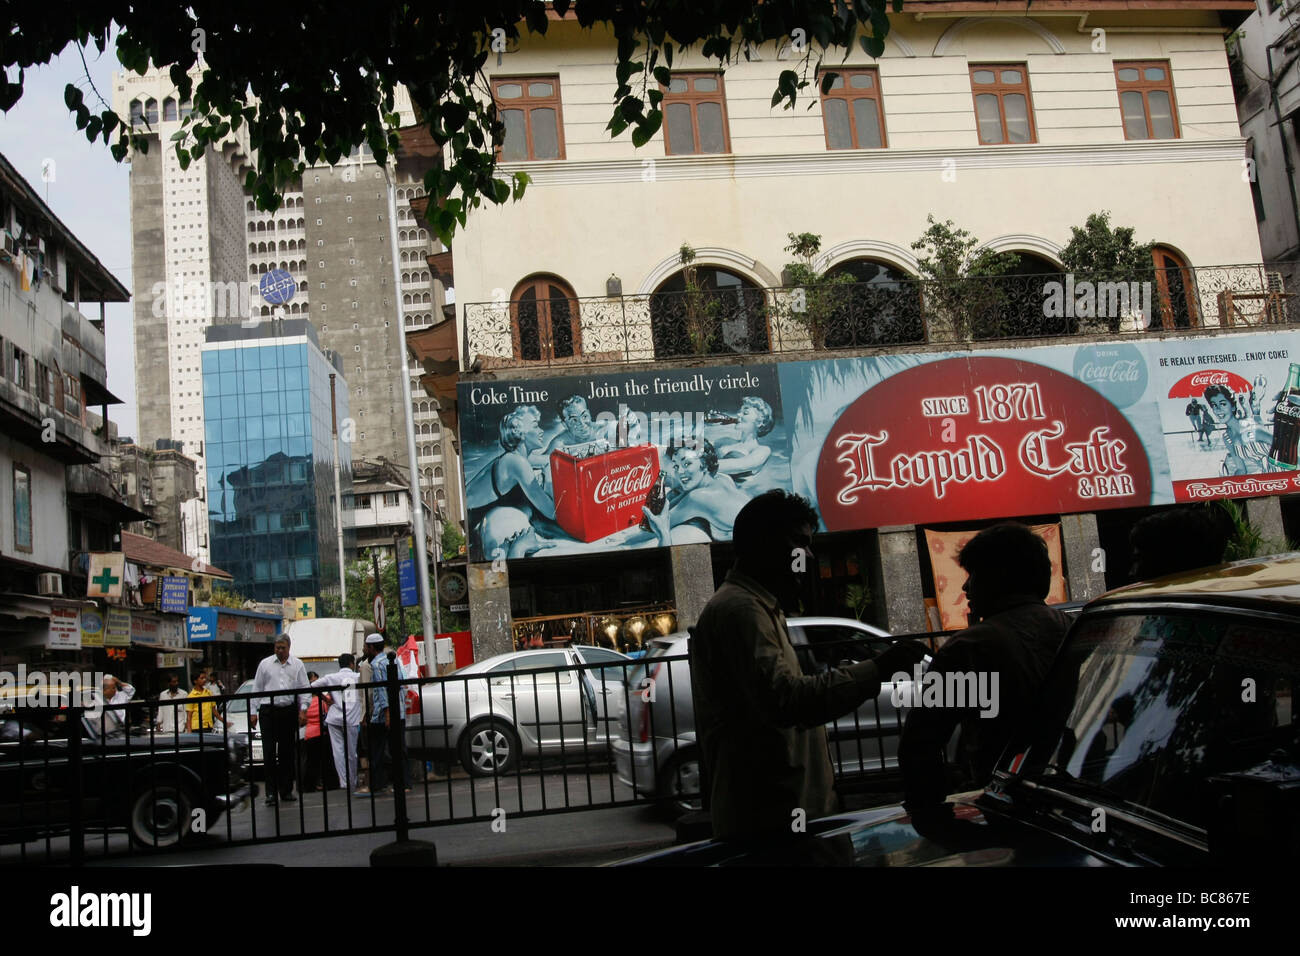 A street view of Leopold Cafe and the Taj Hotel background in Colaba in Mumbai in India Stock Photo